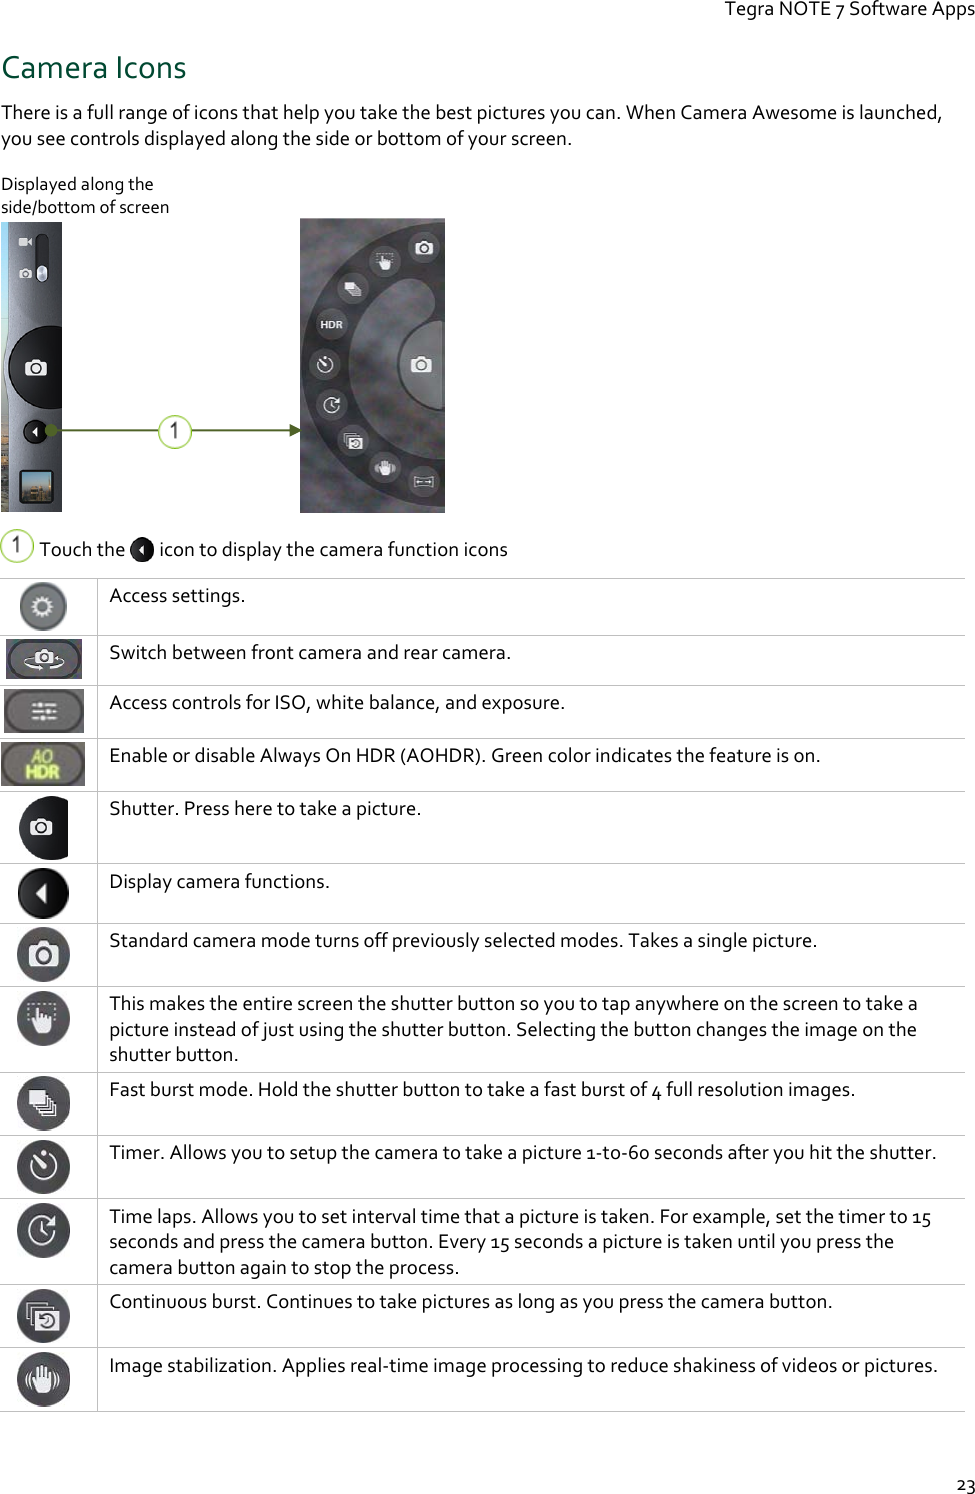 Tegra NOTE 7 Software Apps  23 Camera Icons There is a full range of icons that help you take the best pictures you can. When Camera Awesome is launched, you see controls displayed along the side or bottom of your screen.    Displayed along the  side/bottom of screen      Touch the   icon to display the camera function icons   Access settings.  Switch between front camera and rear camera.  Access controls for ISO, white balance, and exposure.  Enable or disable Always On HDR (AOHDR). Green color indicates the feature is on.  Shutter. Press here to take a picture.  Display camera functions.  Standard camera mode turns off previously selected modes. Takes a single picture.  This makes the entire screen the shutter button so you to tap anywhere on the screen to take a picture instead of just using the shutter button. Selecting the button changes the image on the shutter button.  Fast burst mode. Hold the shutter button to take a fast burst of 4 full resolution images.  Timer. Allows you to setup the camera to take a picture 1-to-60 seconds after you hit the shutter.  Time laps. Allows you to set interval time that a picture is taken. For example, set the timer to 15 seconds and press the camera button. Every 15 seconds a picture is taken until you press the camera button again to stop the process.  Continuous burst. Continues to take pictures as long as you press the camera button.  Image stabilization. Applies real-time image processing to reduce shakiness of videos or pictures. 